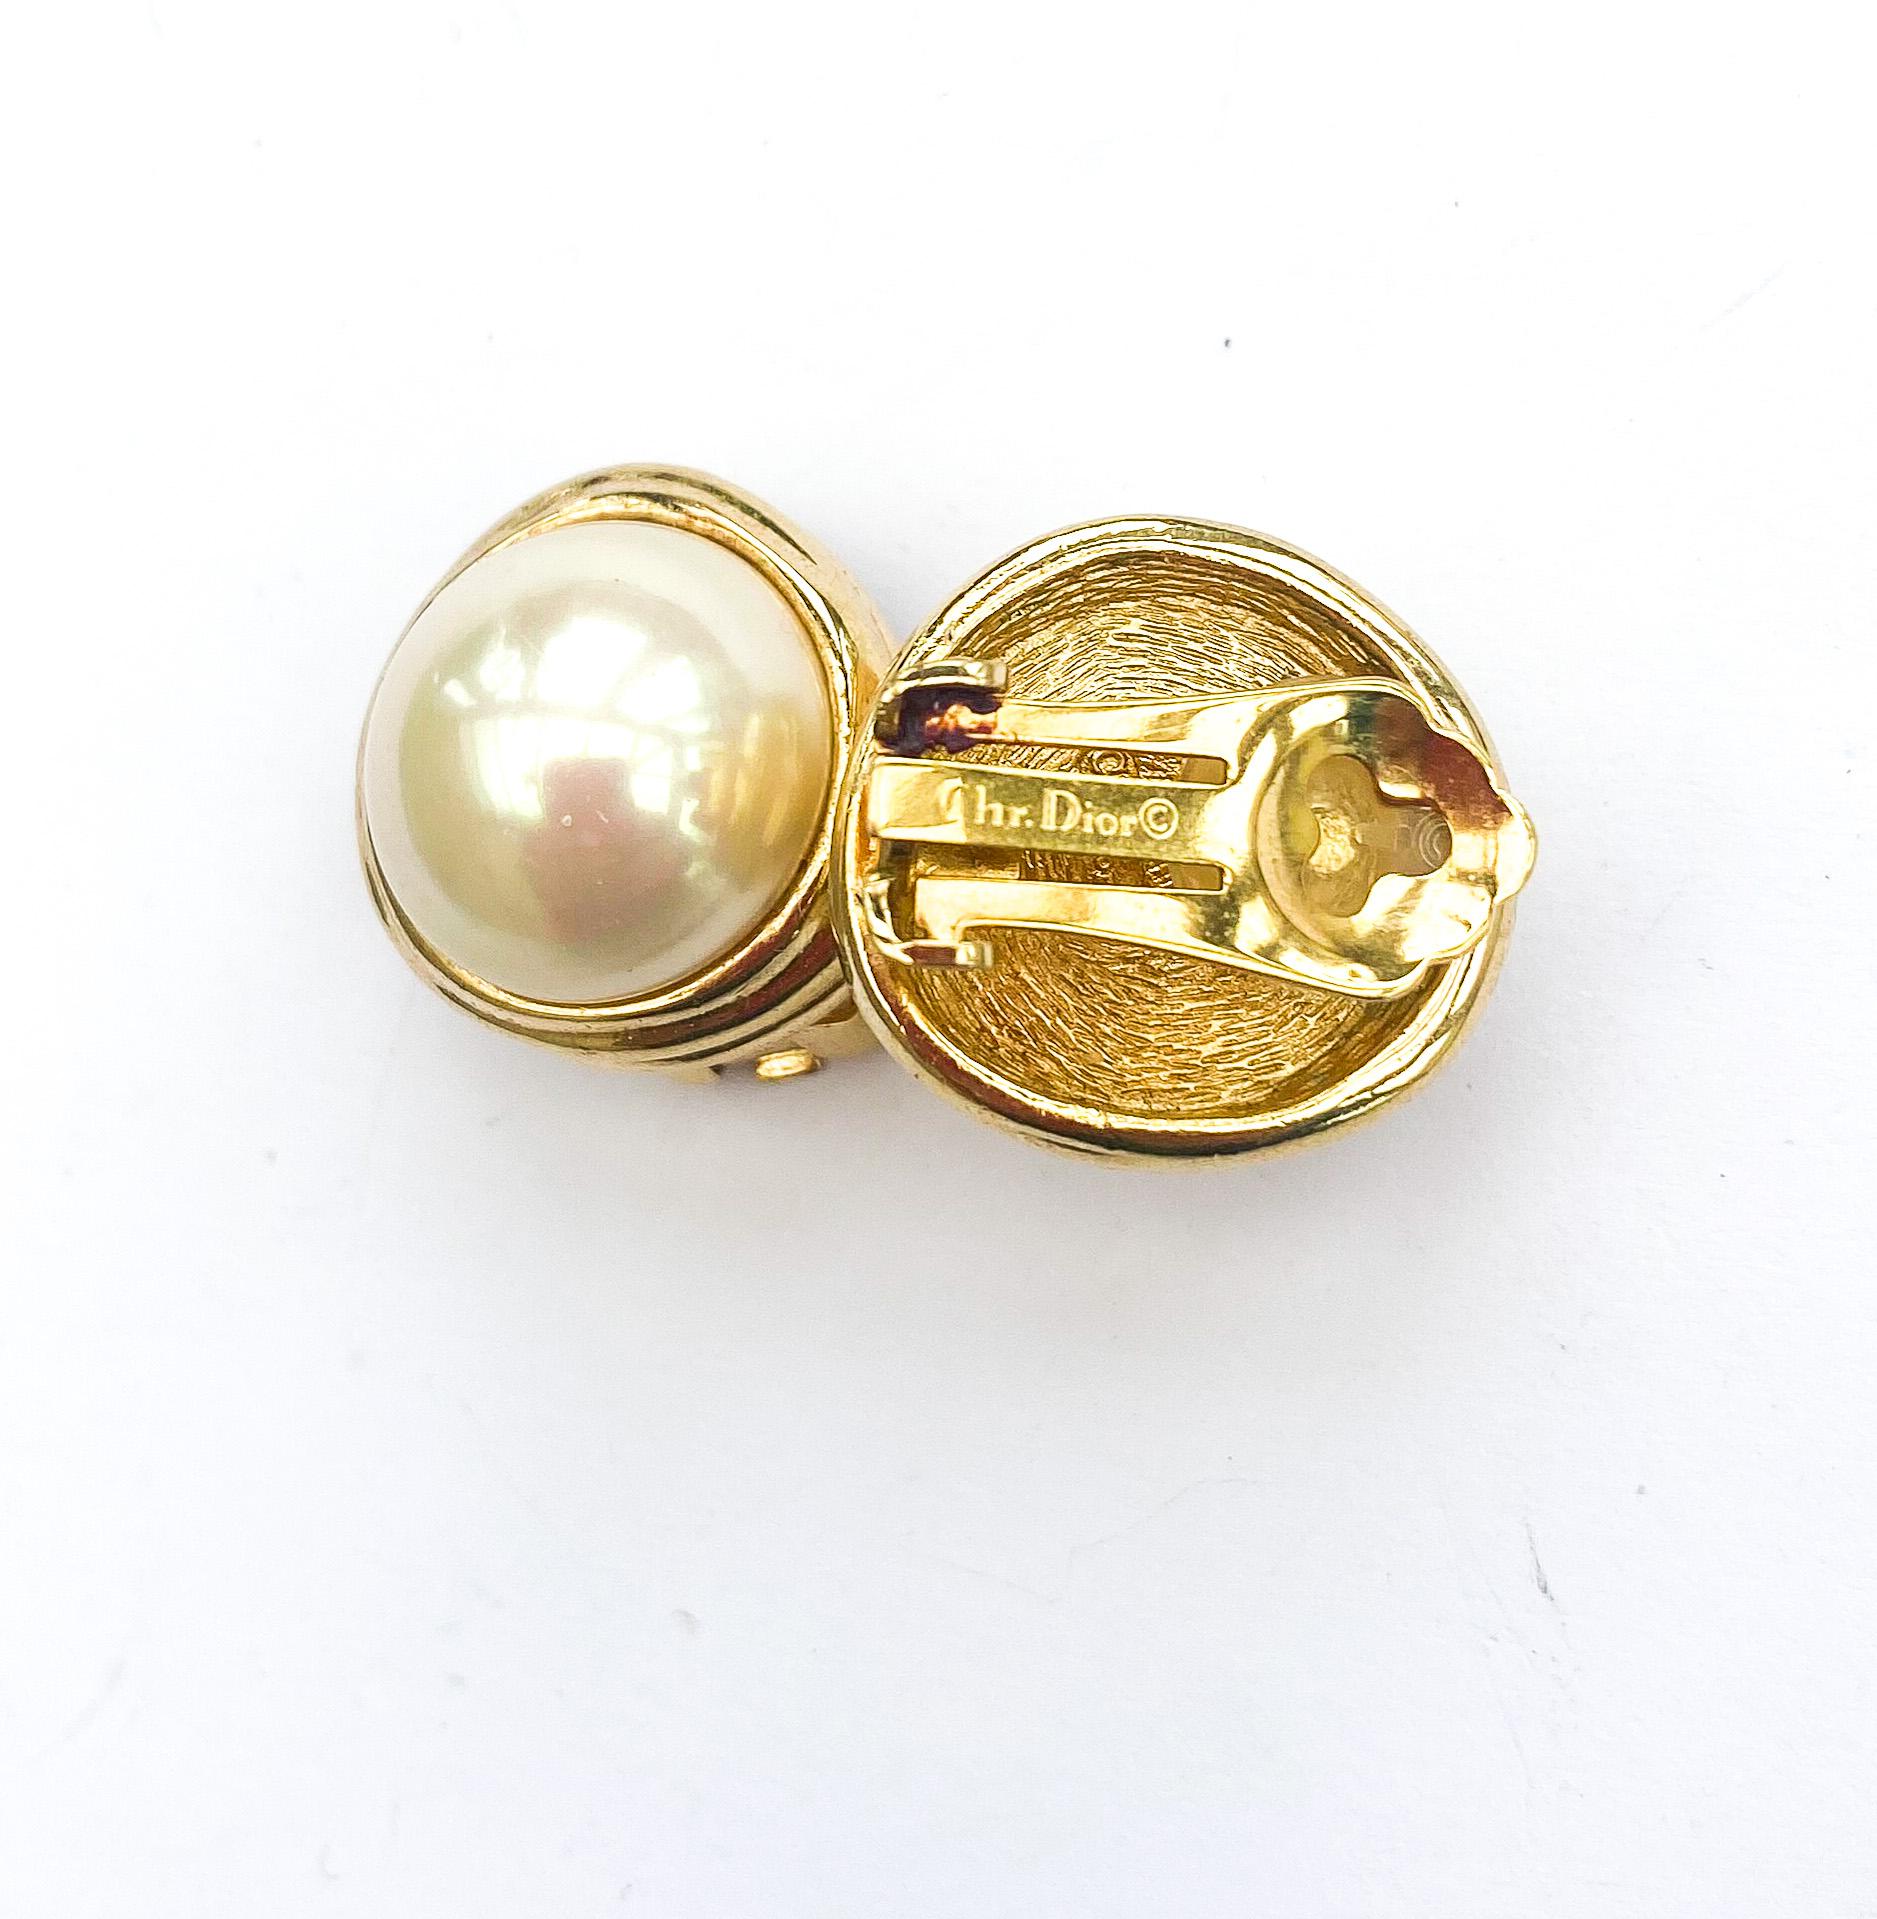 A paste pearl and gilt metal bar brooch and matching earrings, C. Dior, 1980s. For Sale 6